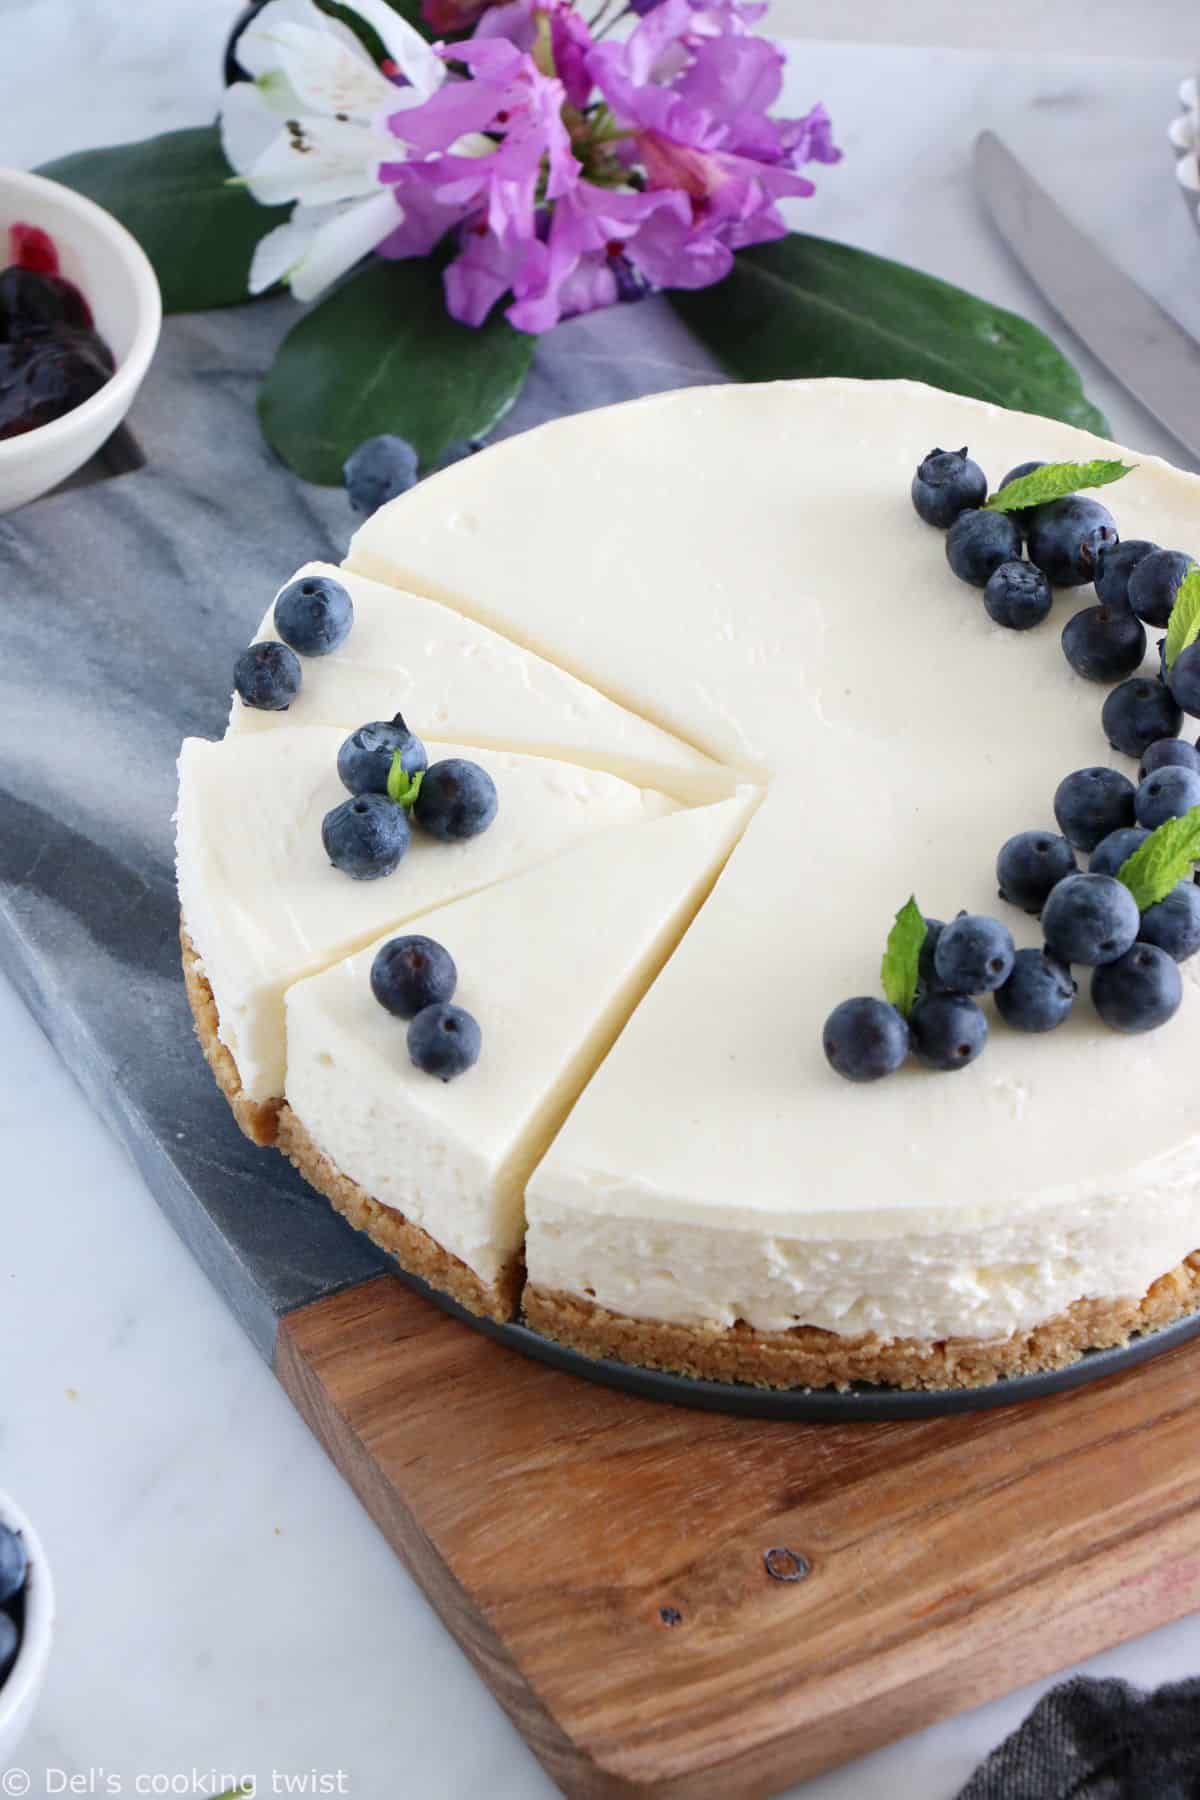 This easy no-bake cheesecake is just perfection. With a few basic ingredients and very minimal effort, you will get a smooth, creamy cheesecake.